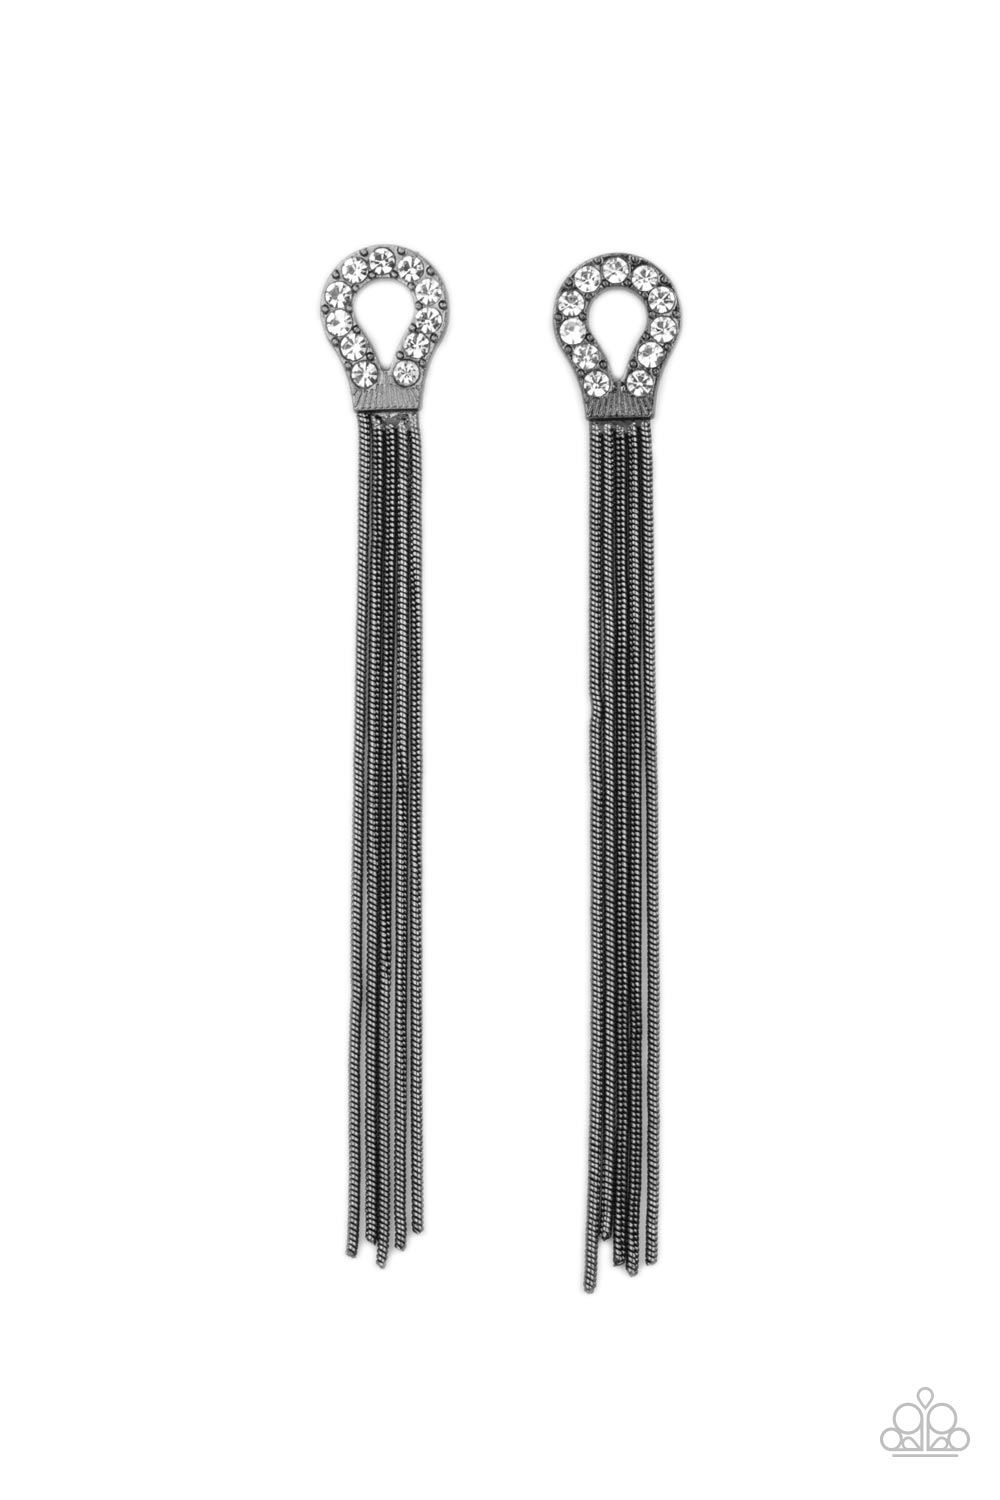 A glistening curtain of round gunmetal snake chains stream out from the bottom of a dainty horseshoe frame adorned in glassy white rhinestones, creating a tantalizing tassel. Earring attaches to a standard post fitting.